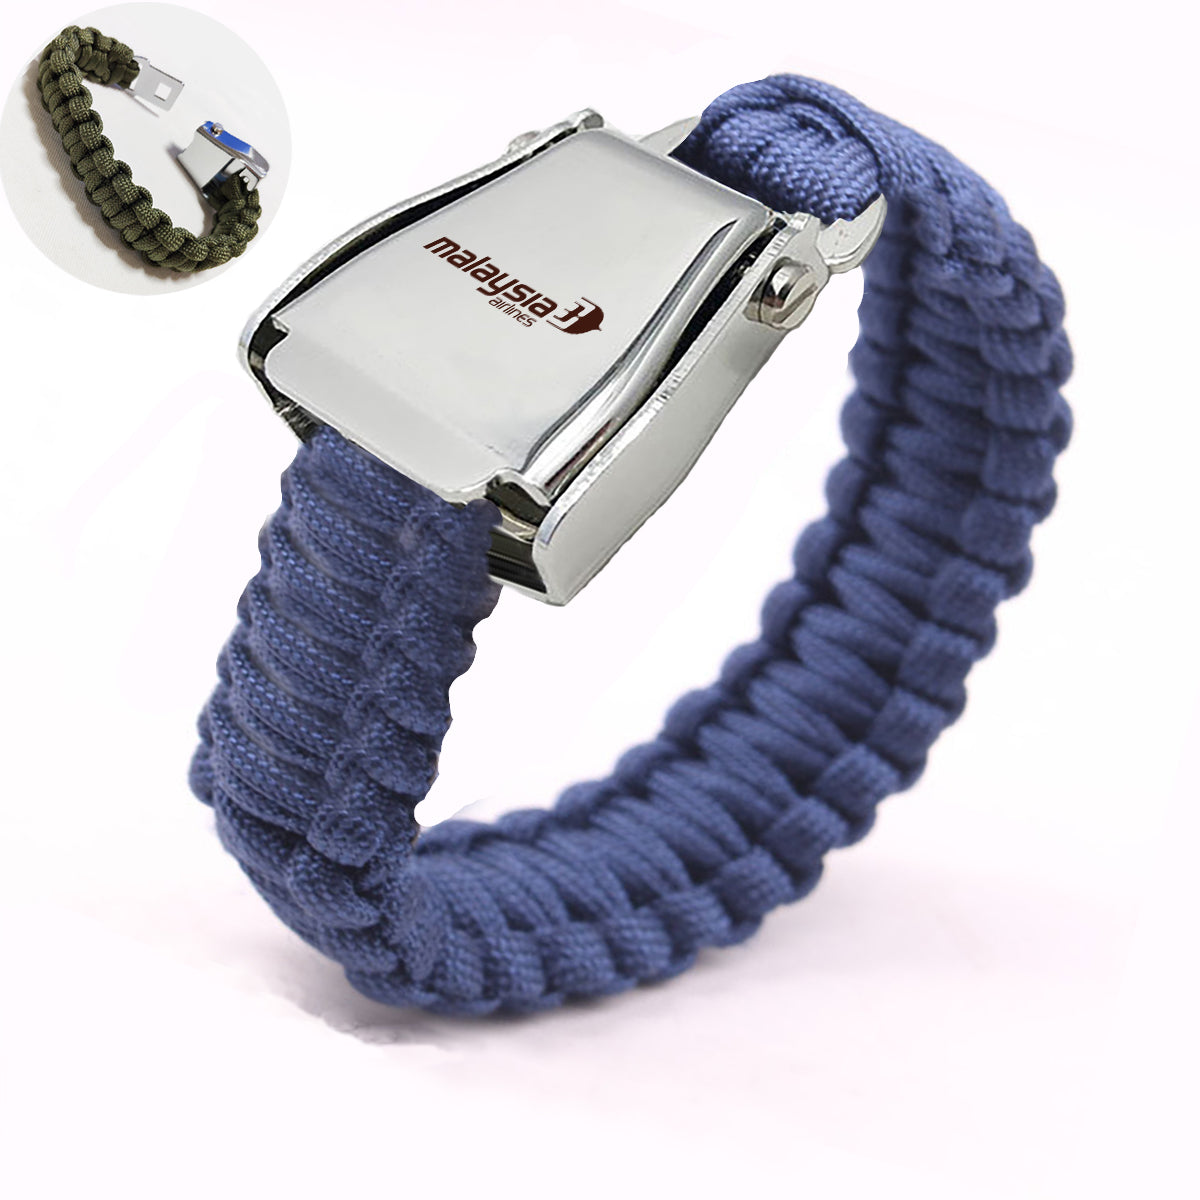 Malaysia Airlines Design Airplane Seat Belt Bracelet